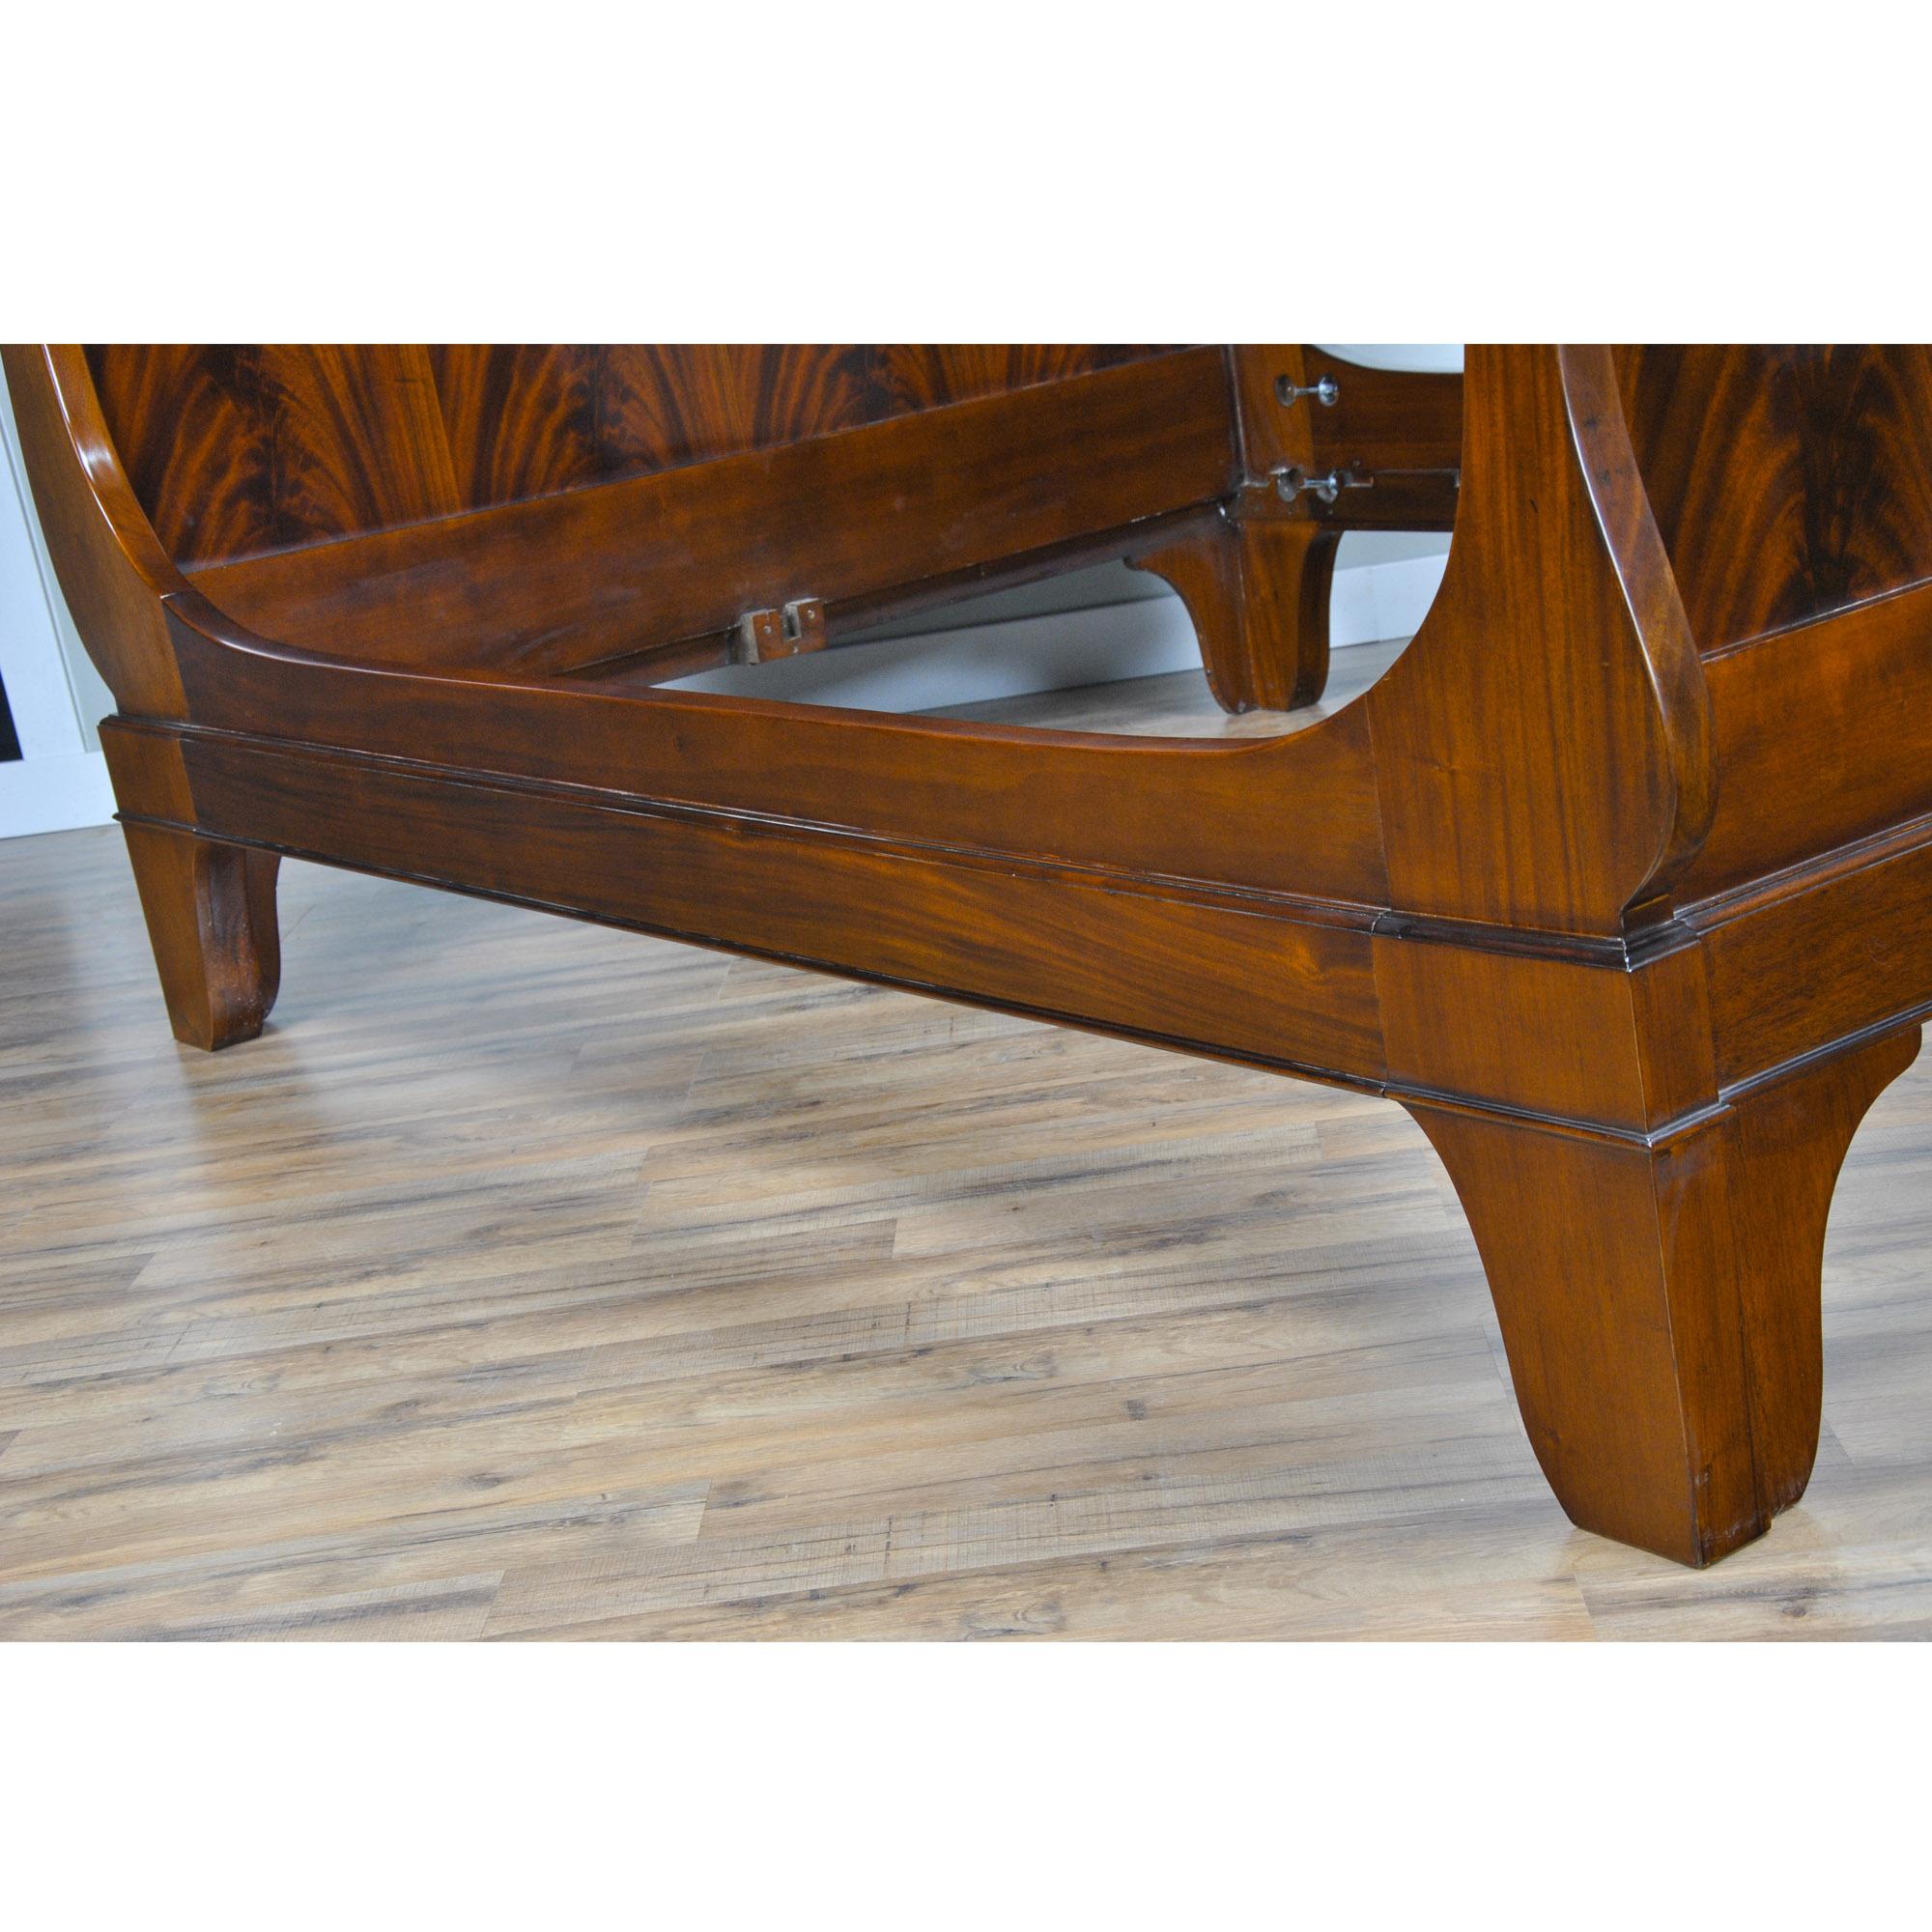 Contemporary Mahogany King Size Sleigh Bed For Sale